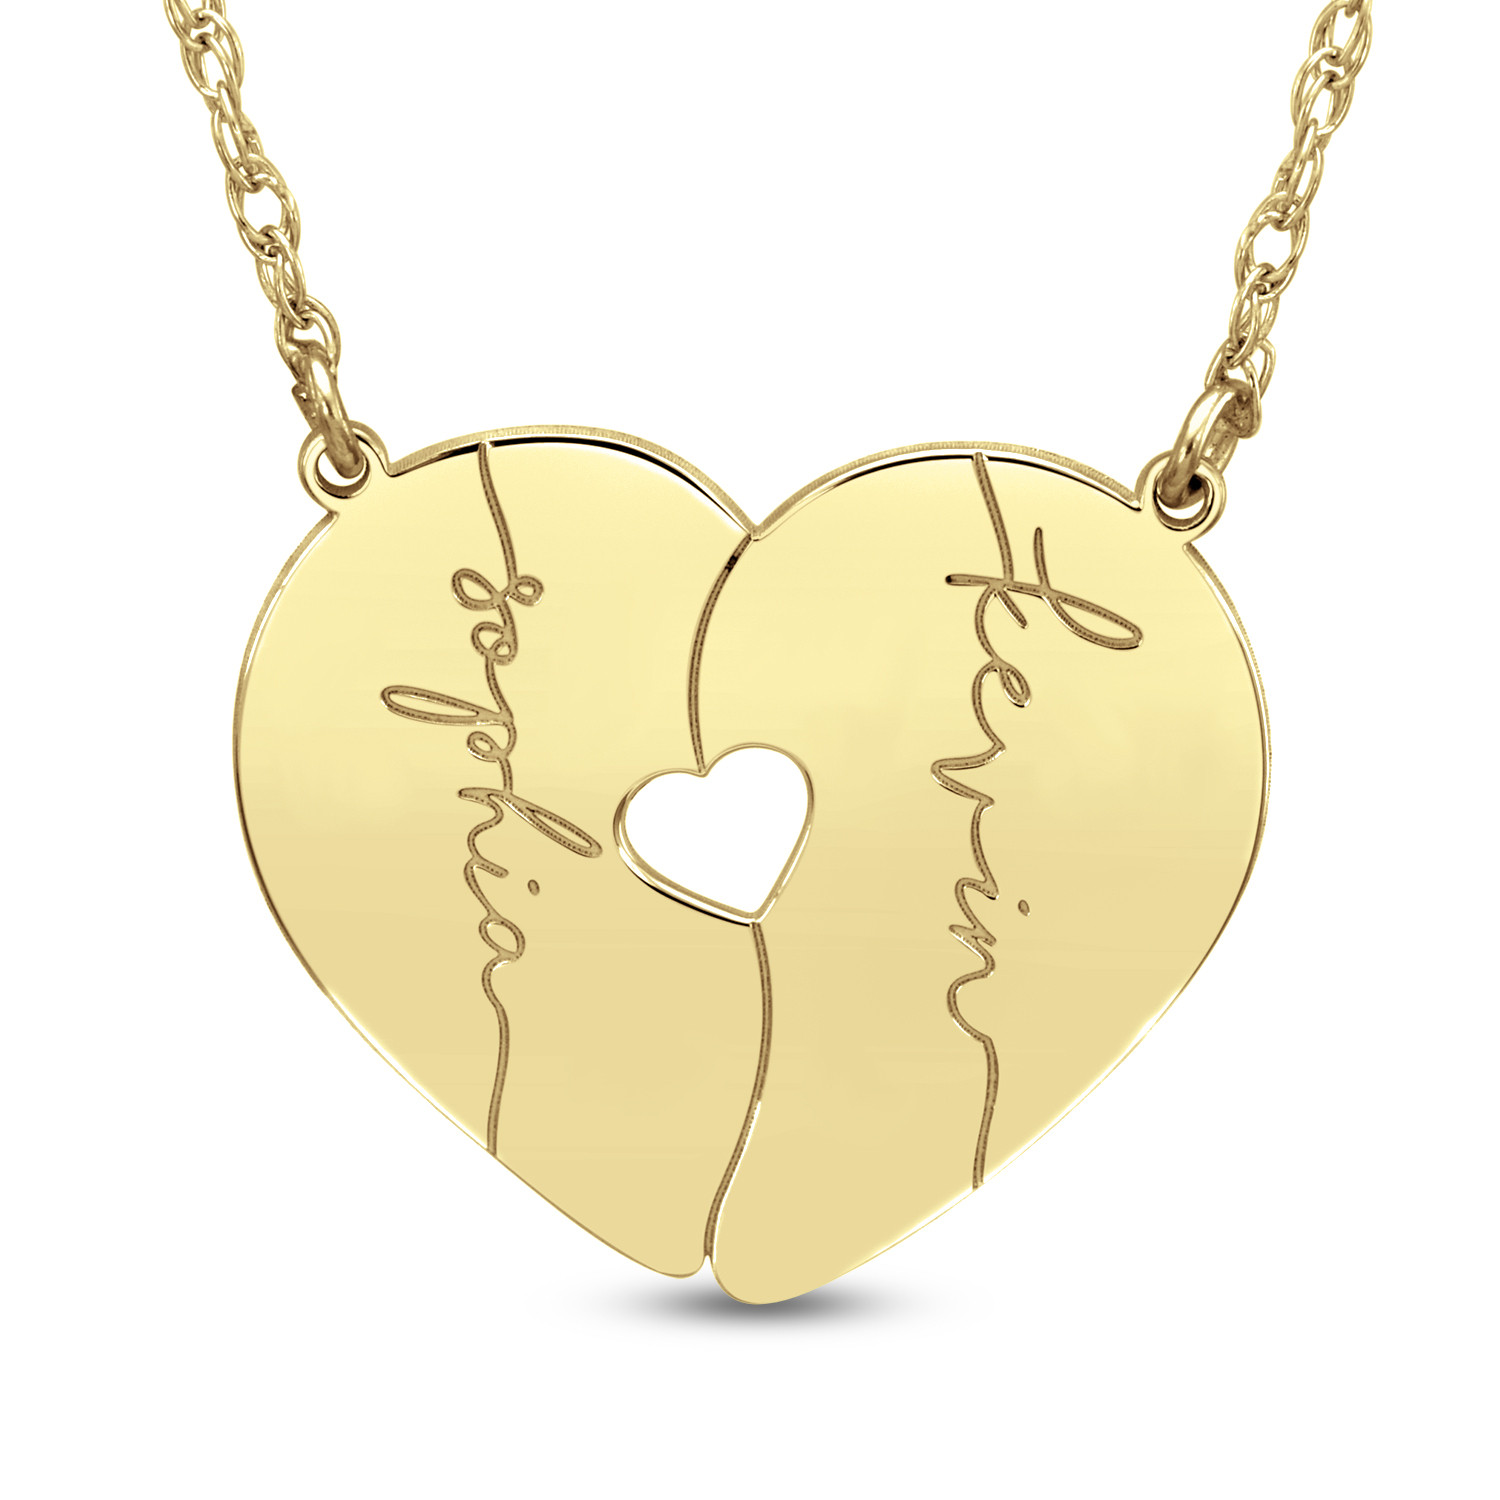 Twinkles 24k Yellow Gold Tooth Jewellry Large Heart